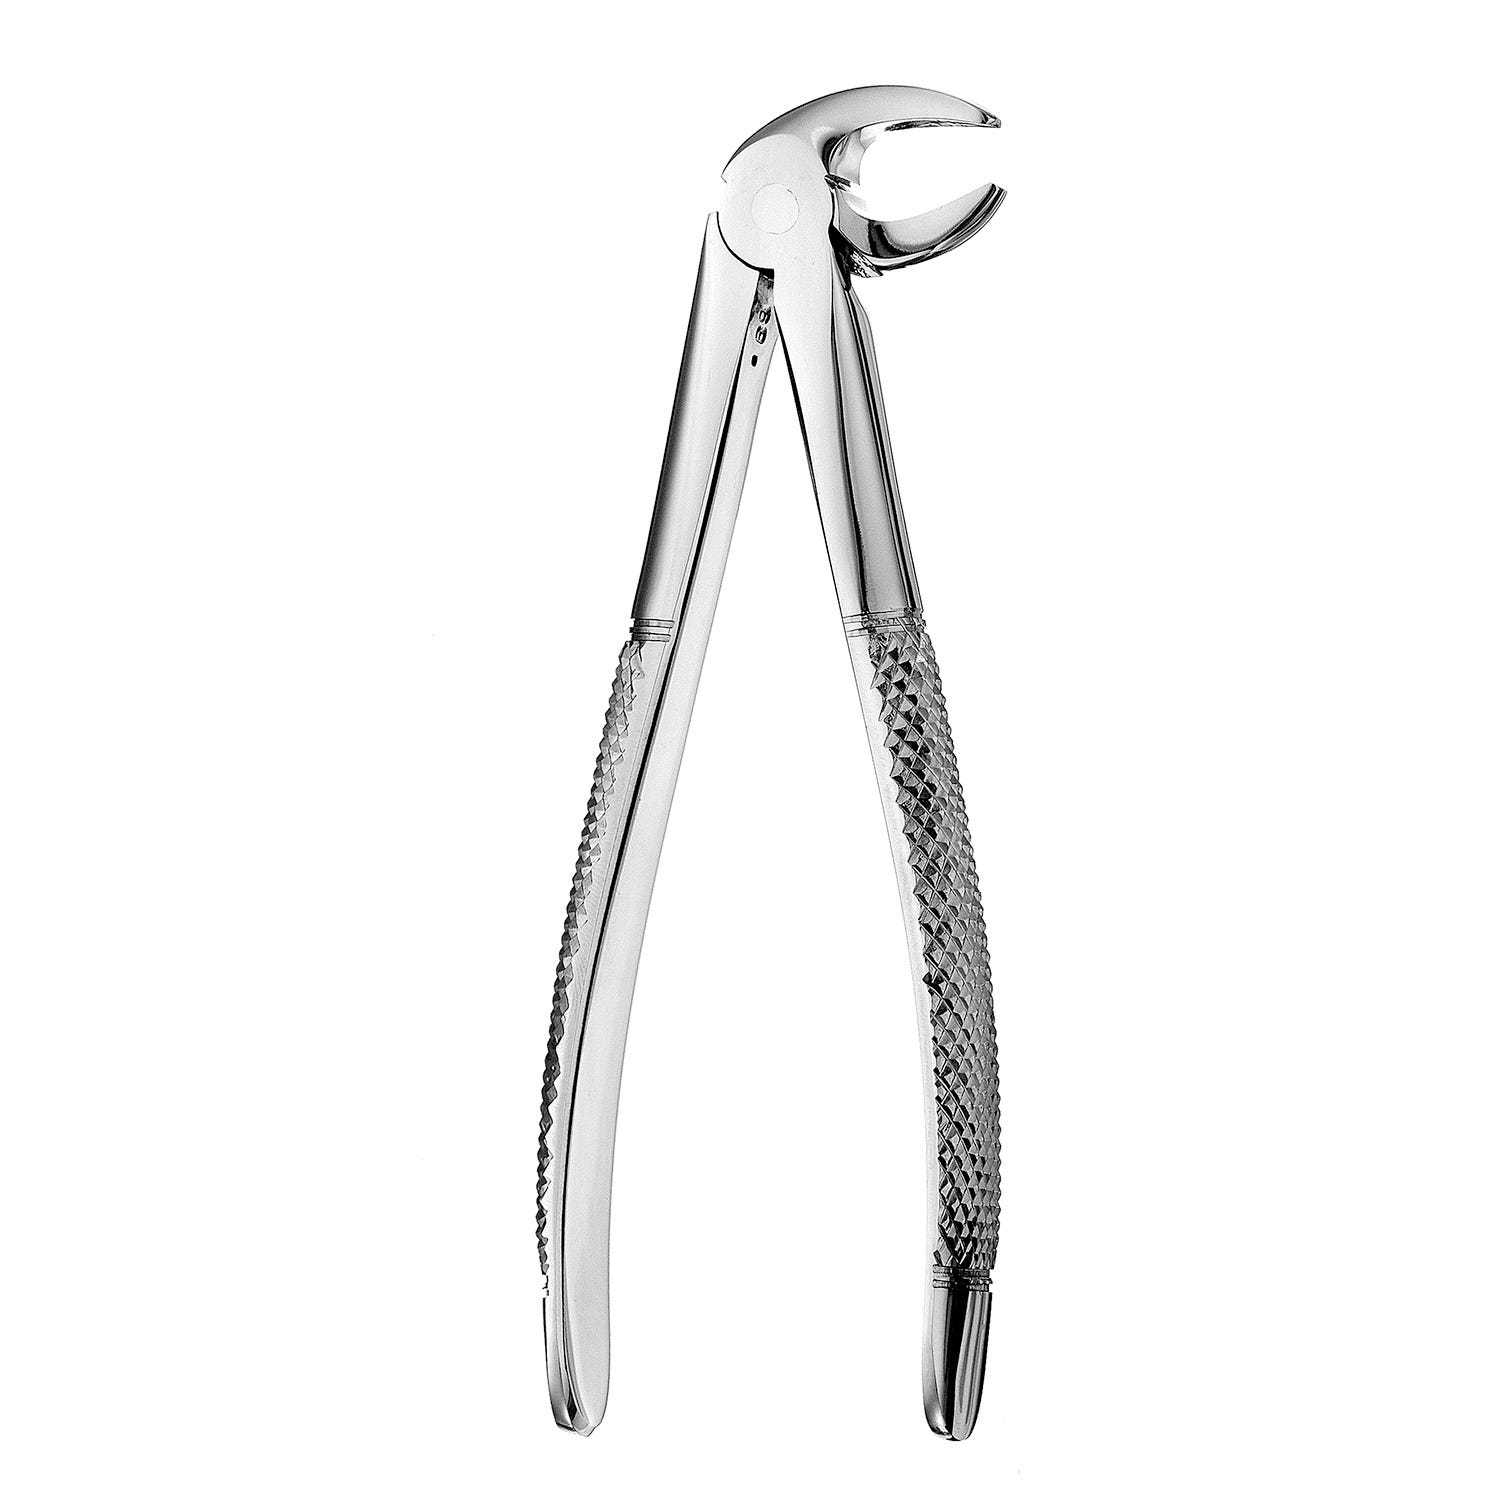 Forcep Lower Anterior Mead #MD3, 5 -1/2" 14cm Serrated